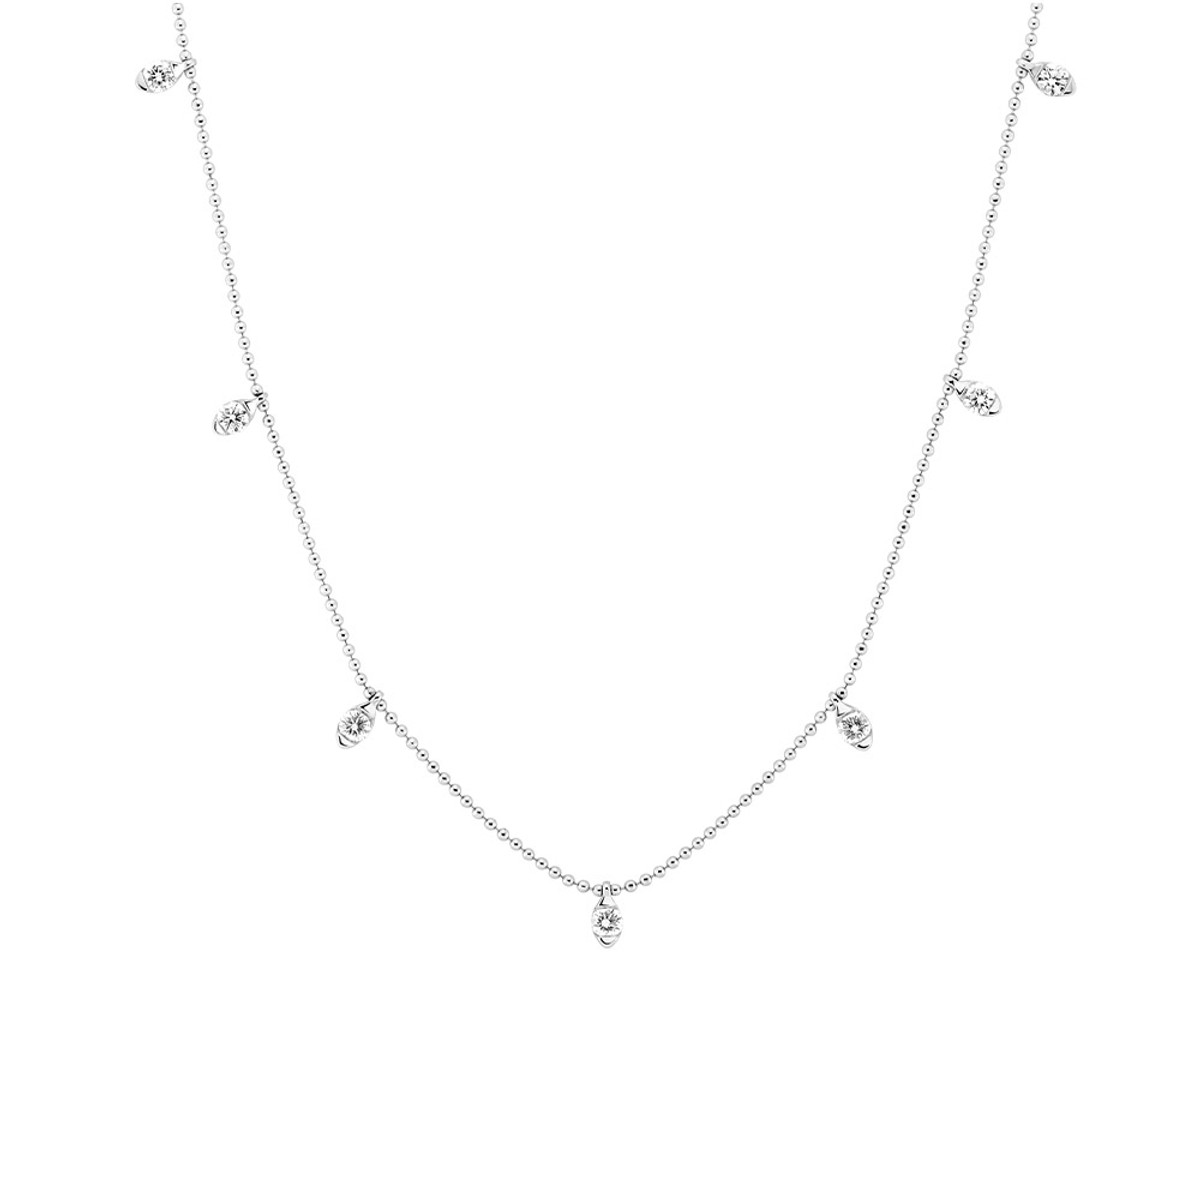 18WG RD DIA NECKLACE 0.43CTTW-43803